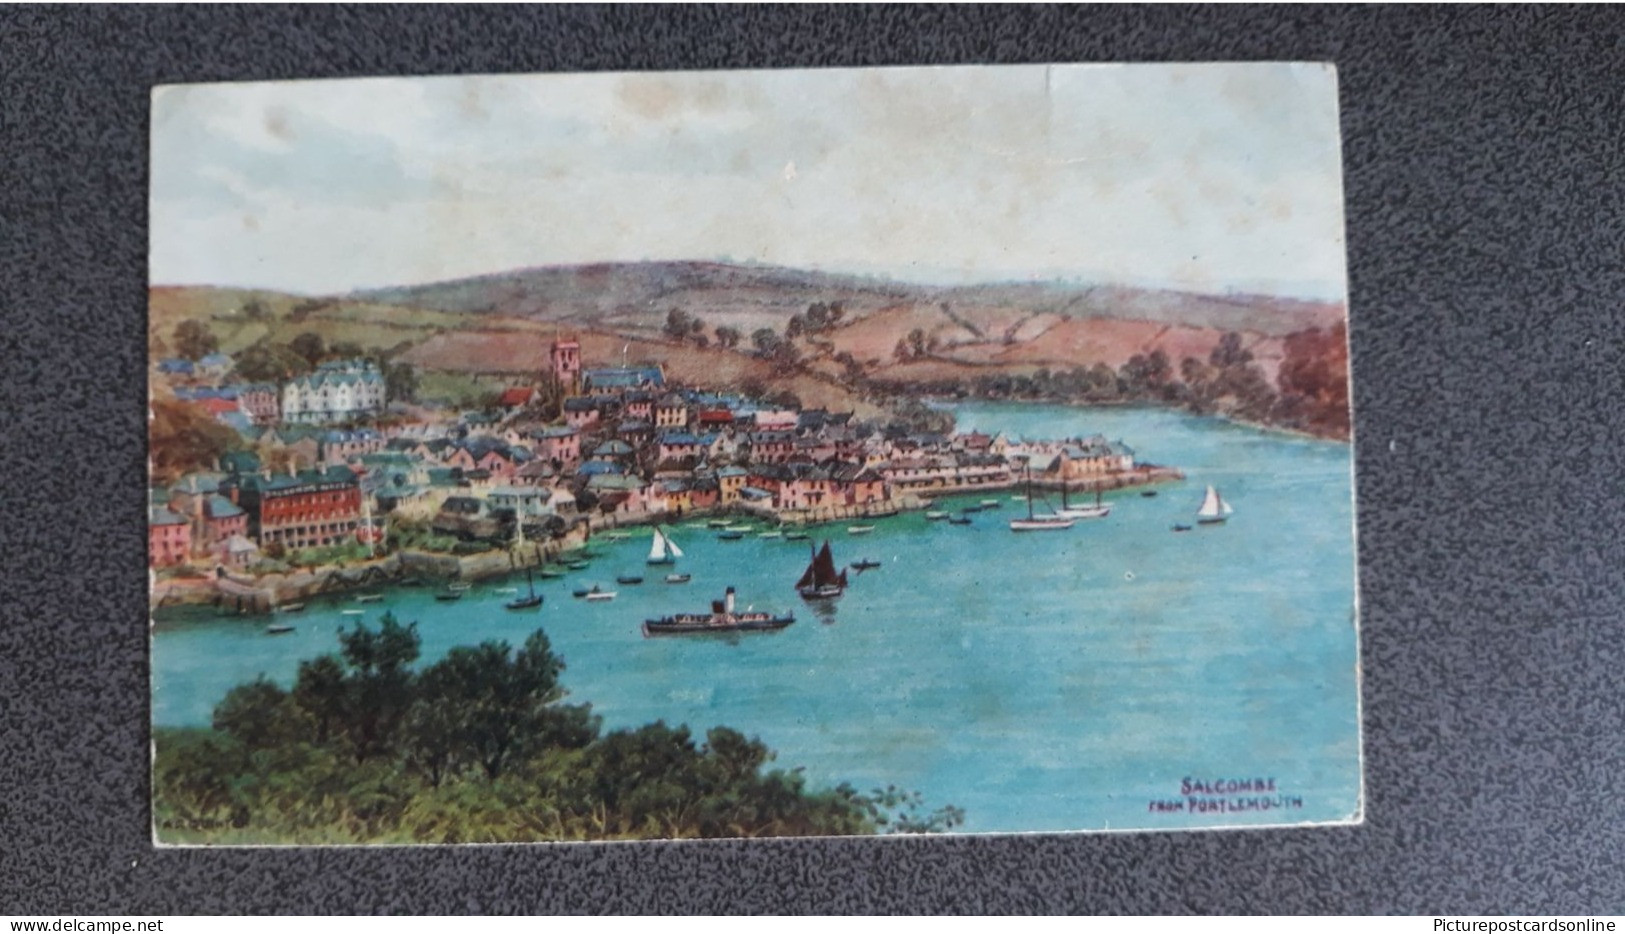 SALCOMBE FROM PORTLEMOUTH OLD COLOUR ART POSTCARD ARTIST SIGNED A. R. QUINTON ARQ SALMON NO 2394 - Quinton, AR